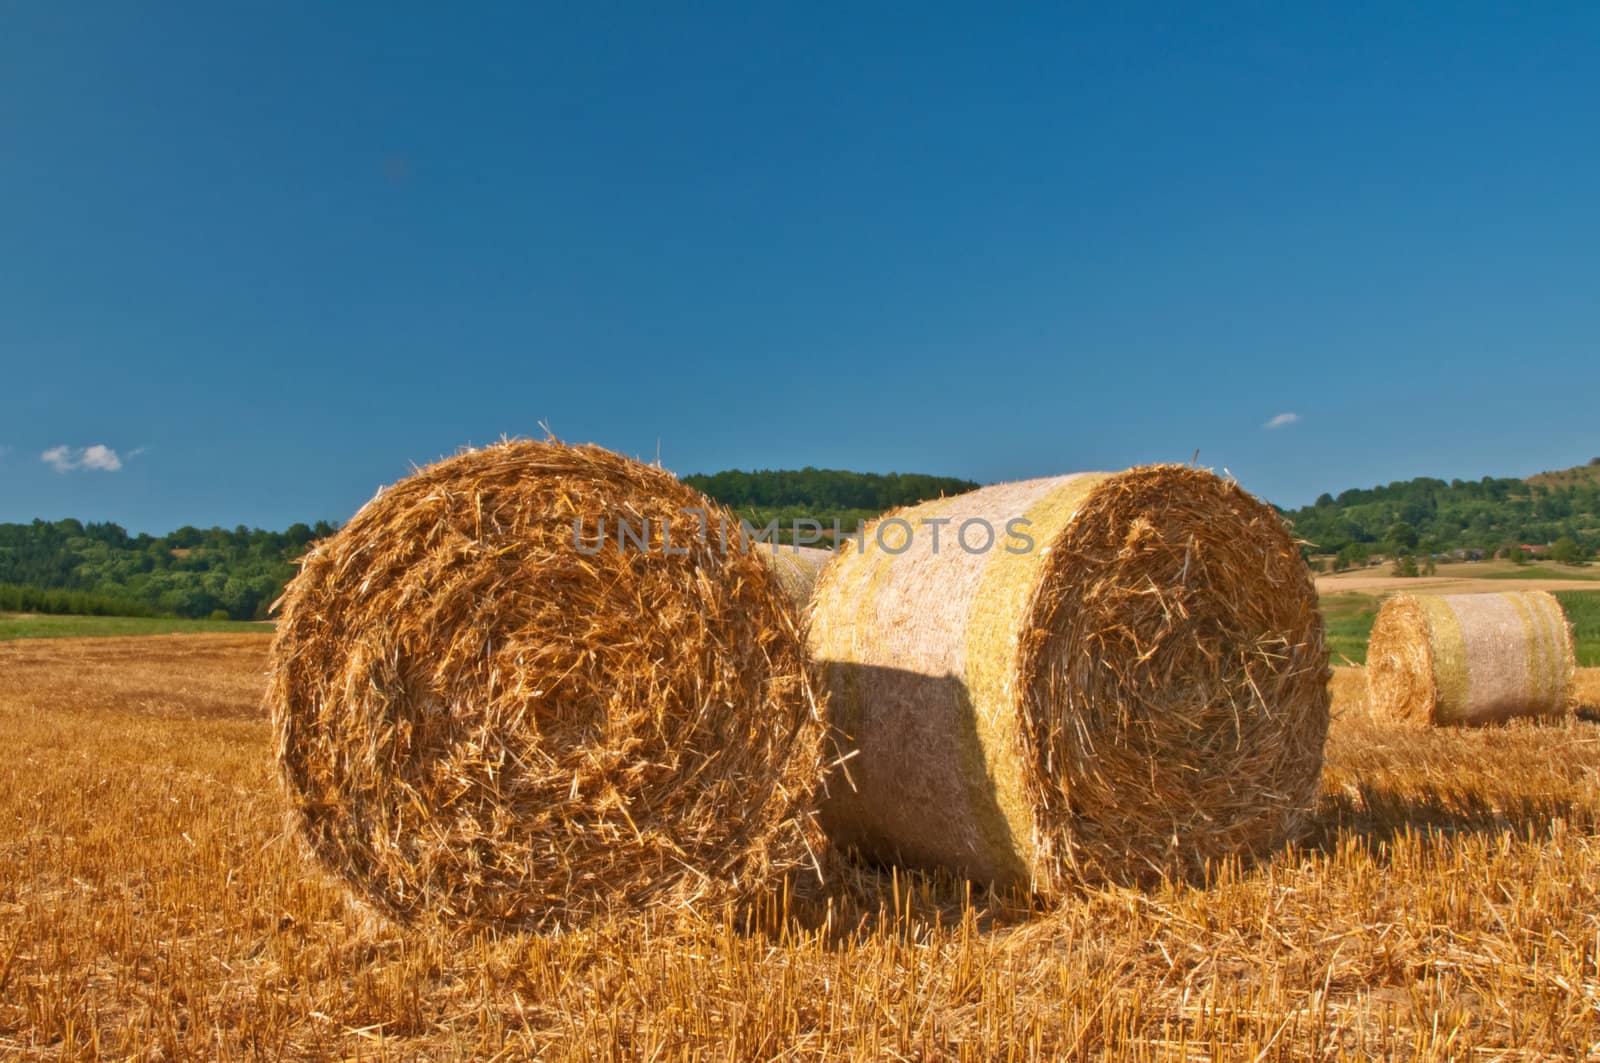 bale of straw with a blue sky